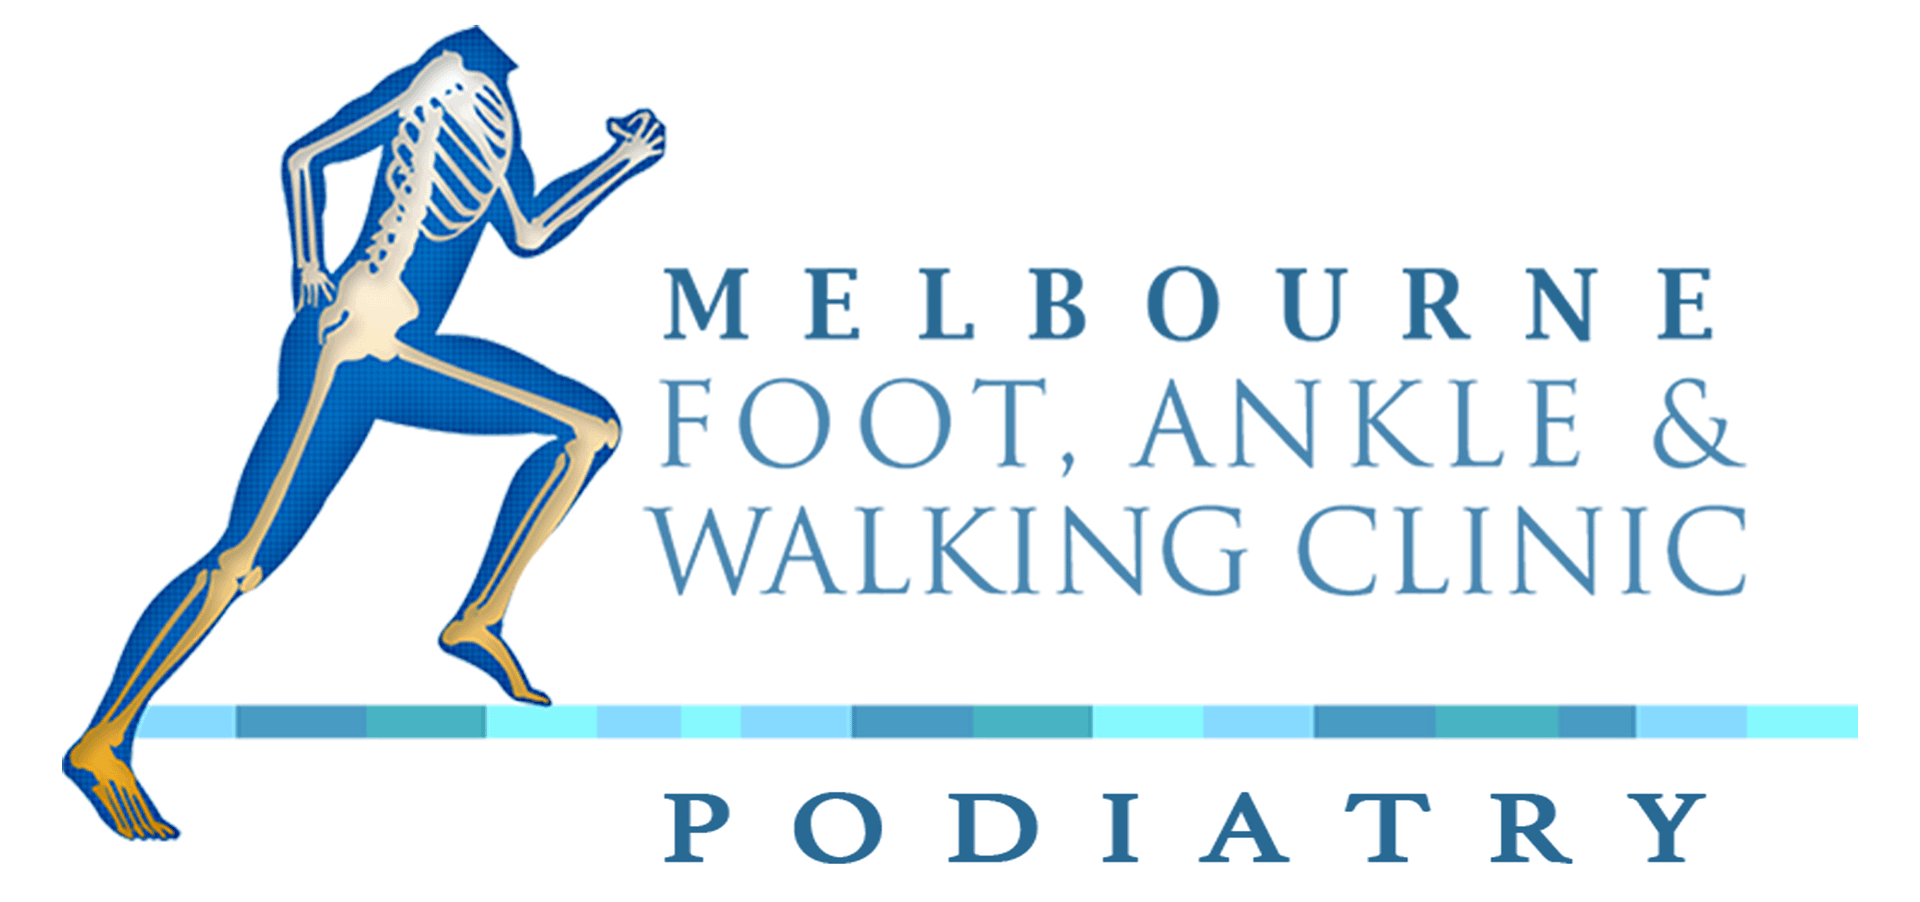 Melbourne Foot, Ankle & Walking Clinic